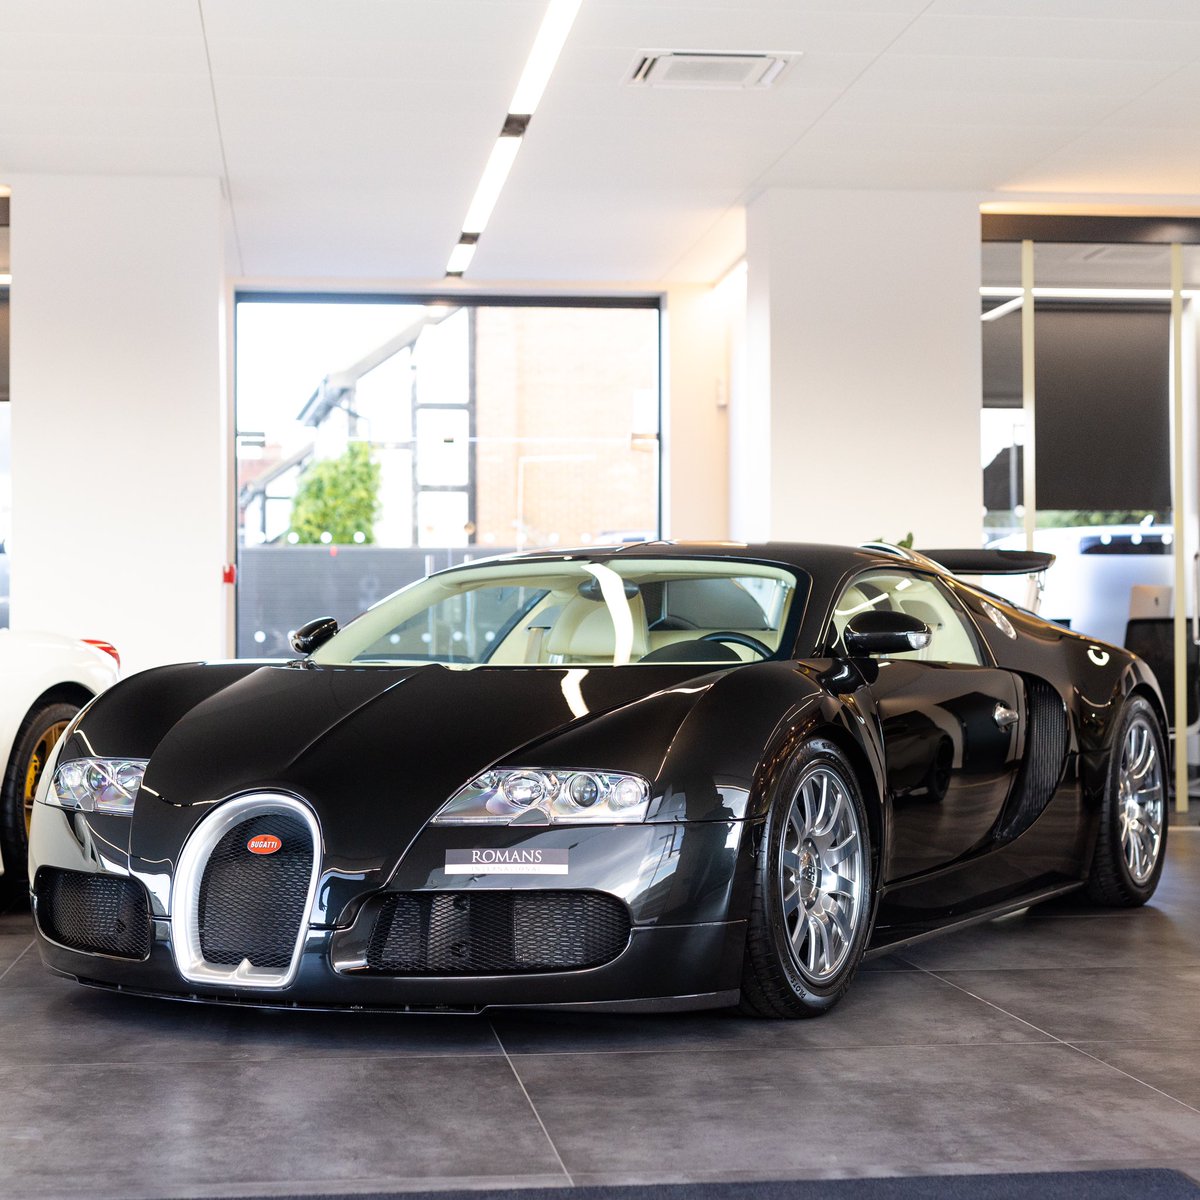 What a way to start December! Our Bugatti Veyron is now #UnderOffer